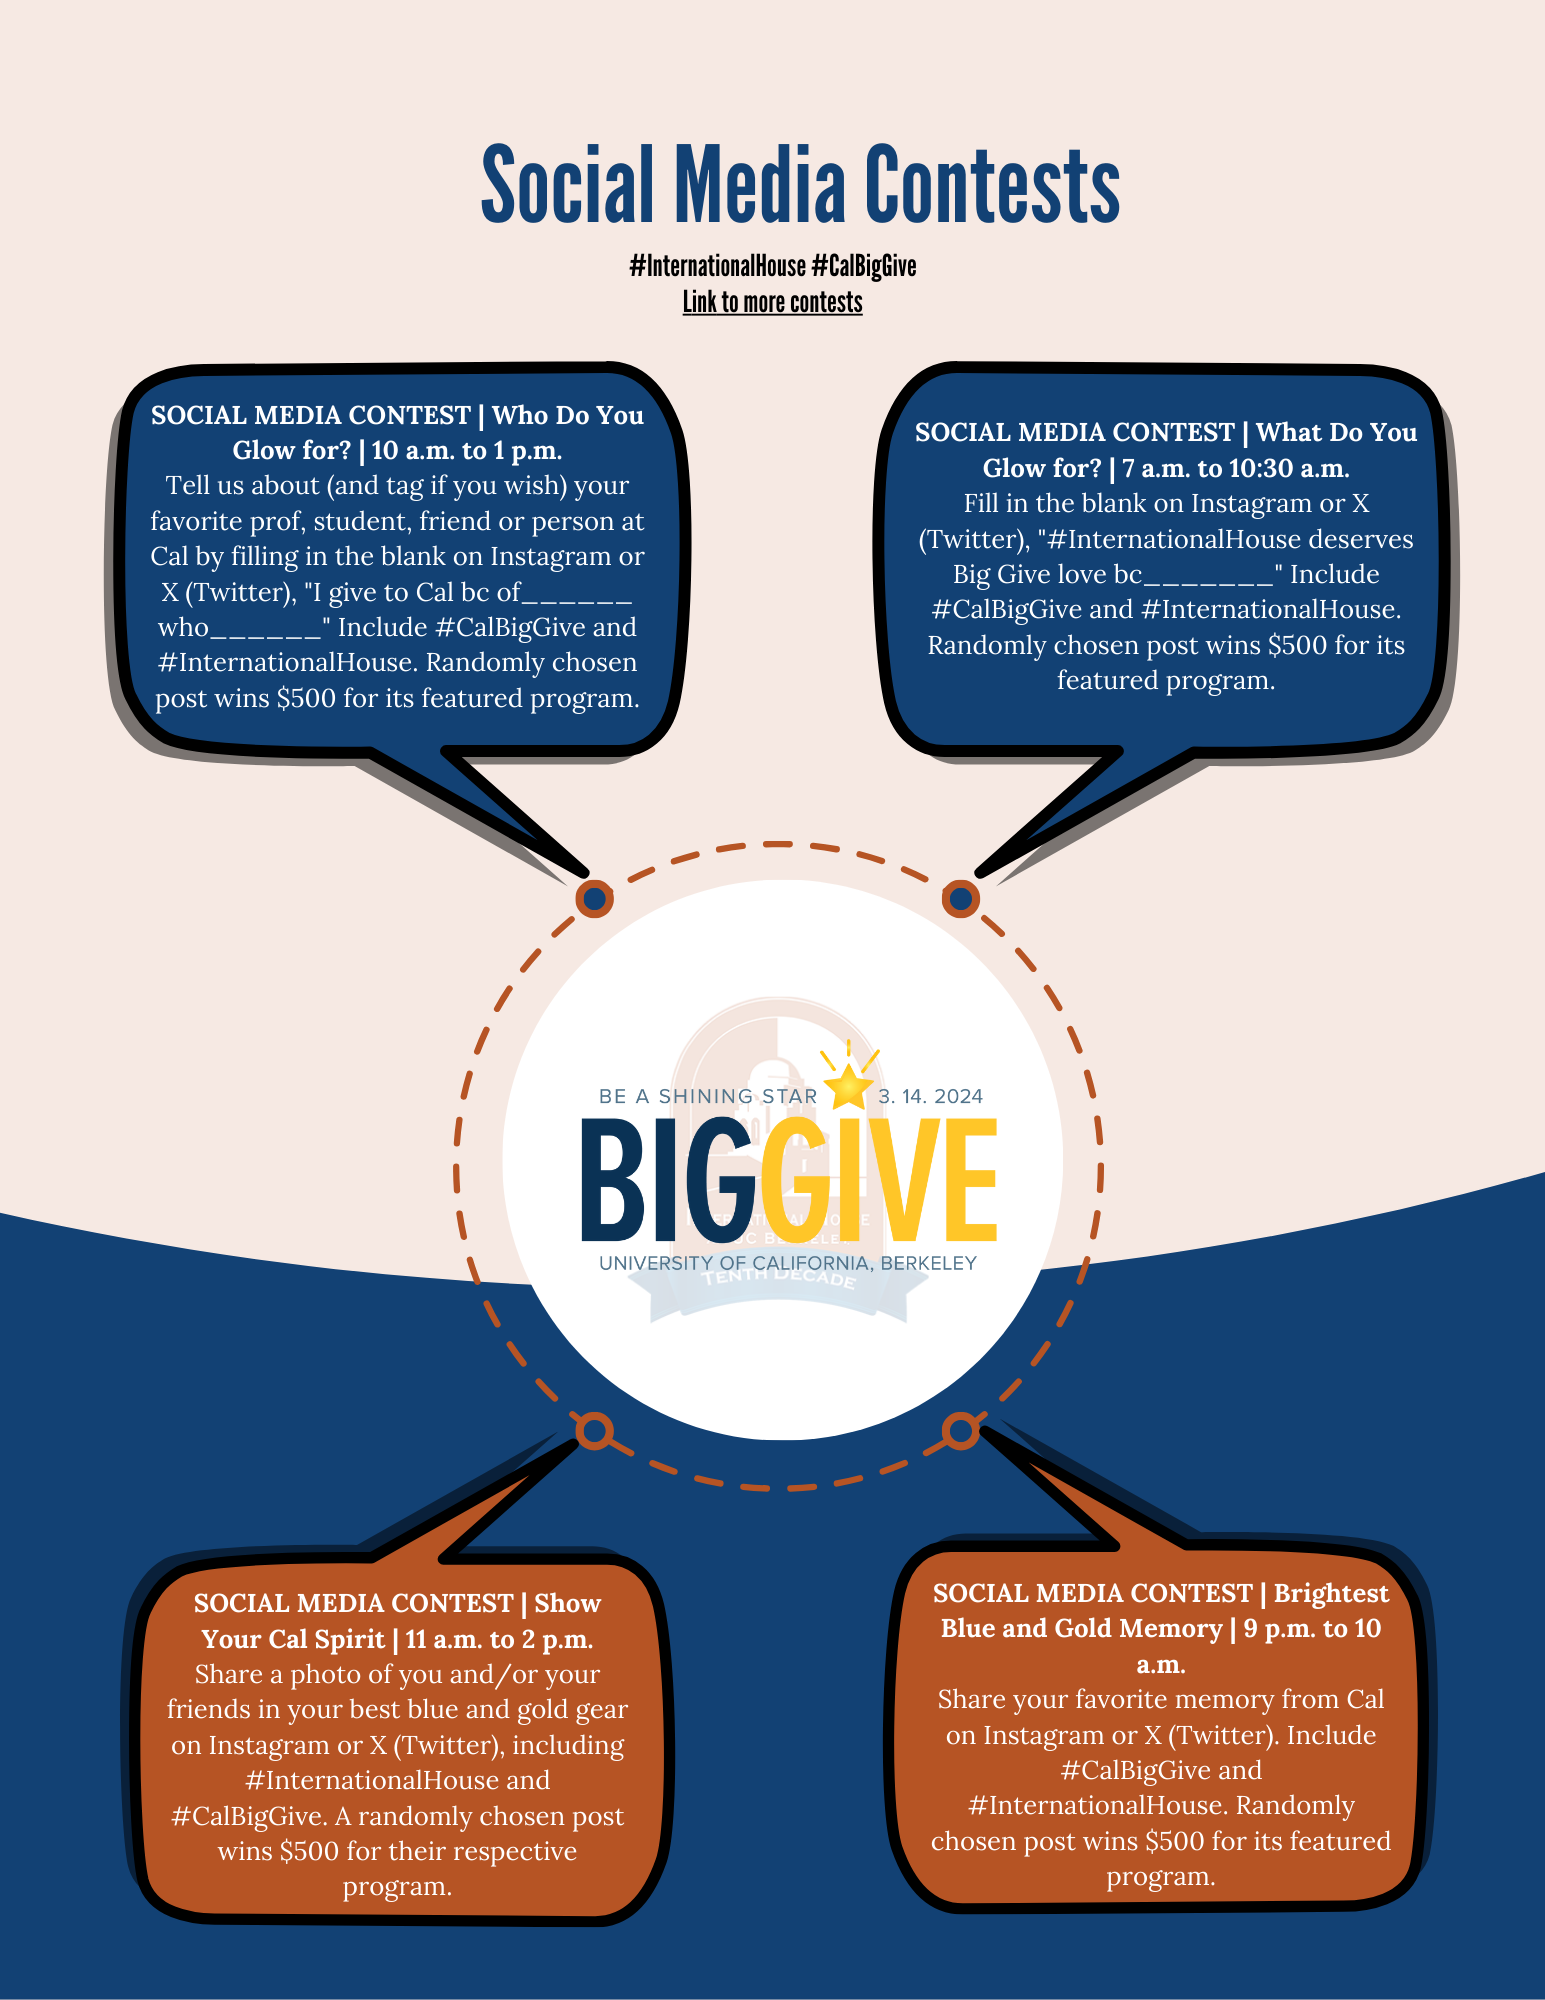 A poster highlighting the social media contests that are a part of the Big Give.